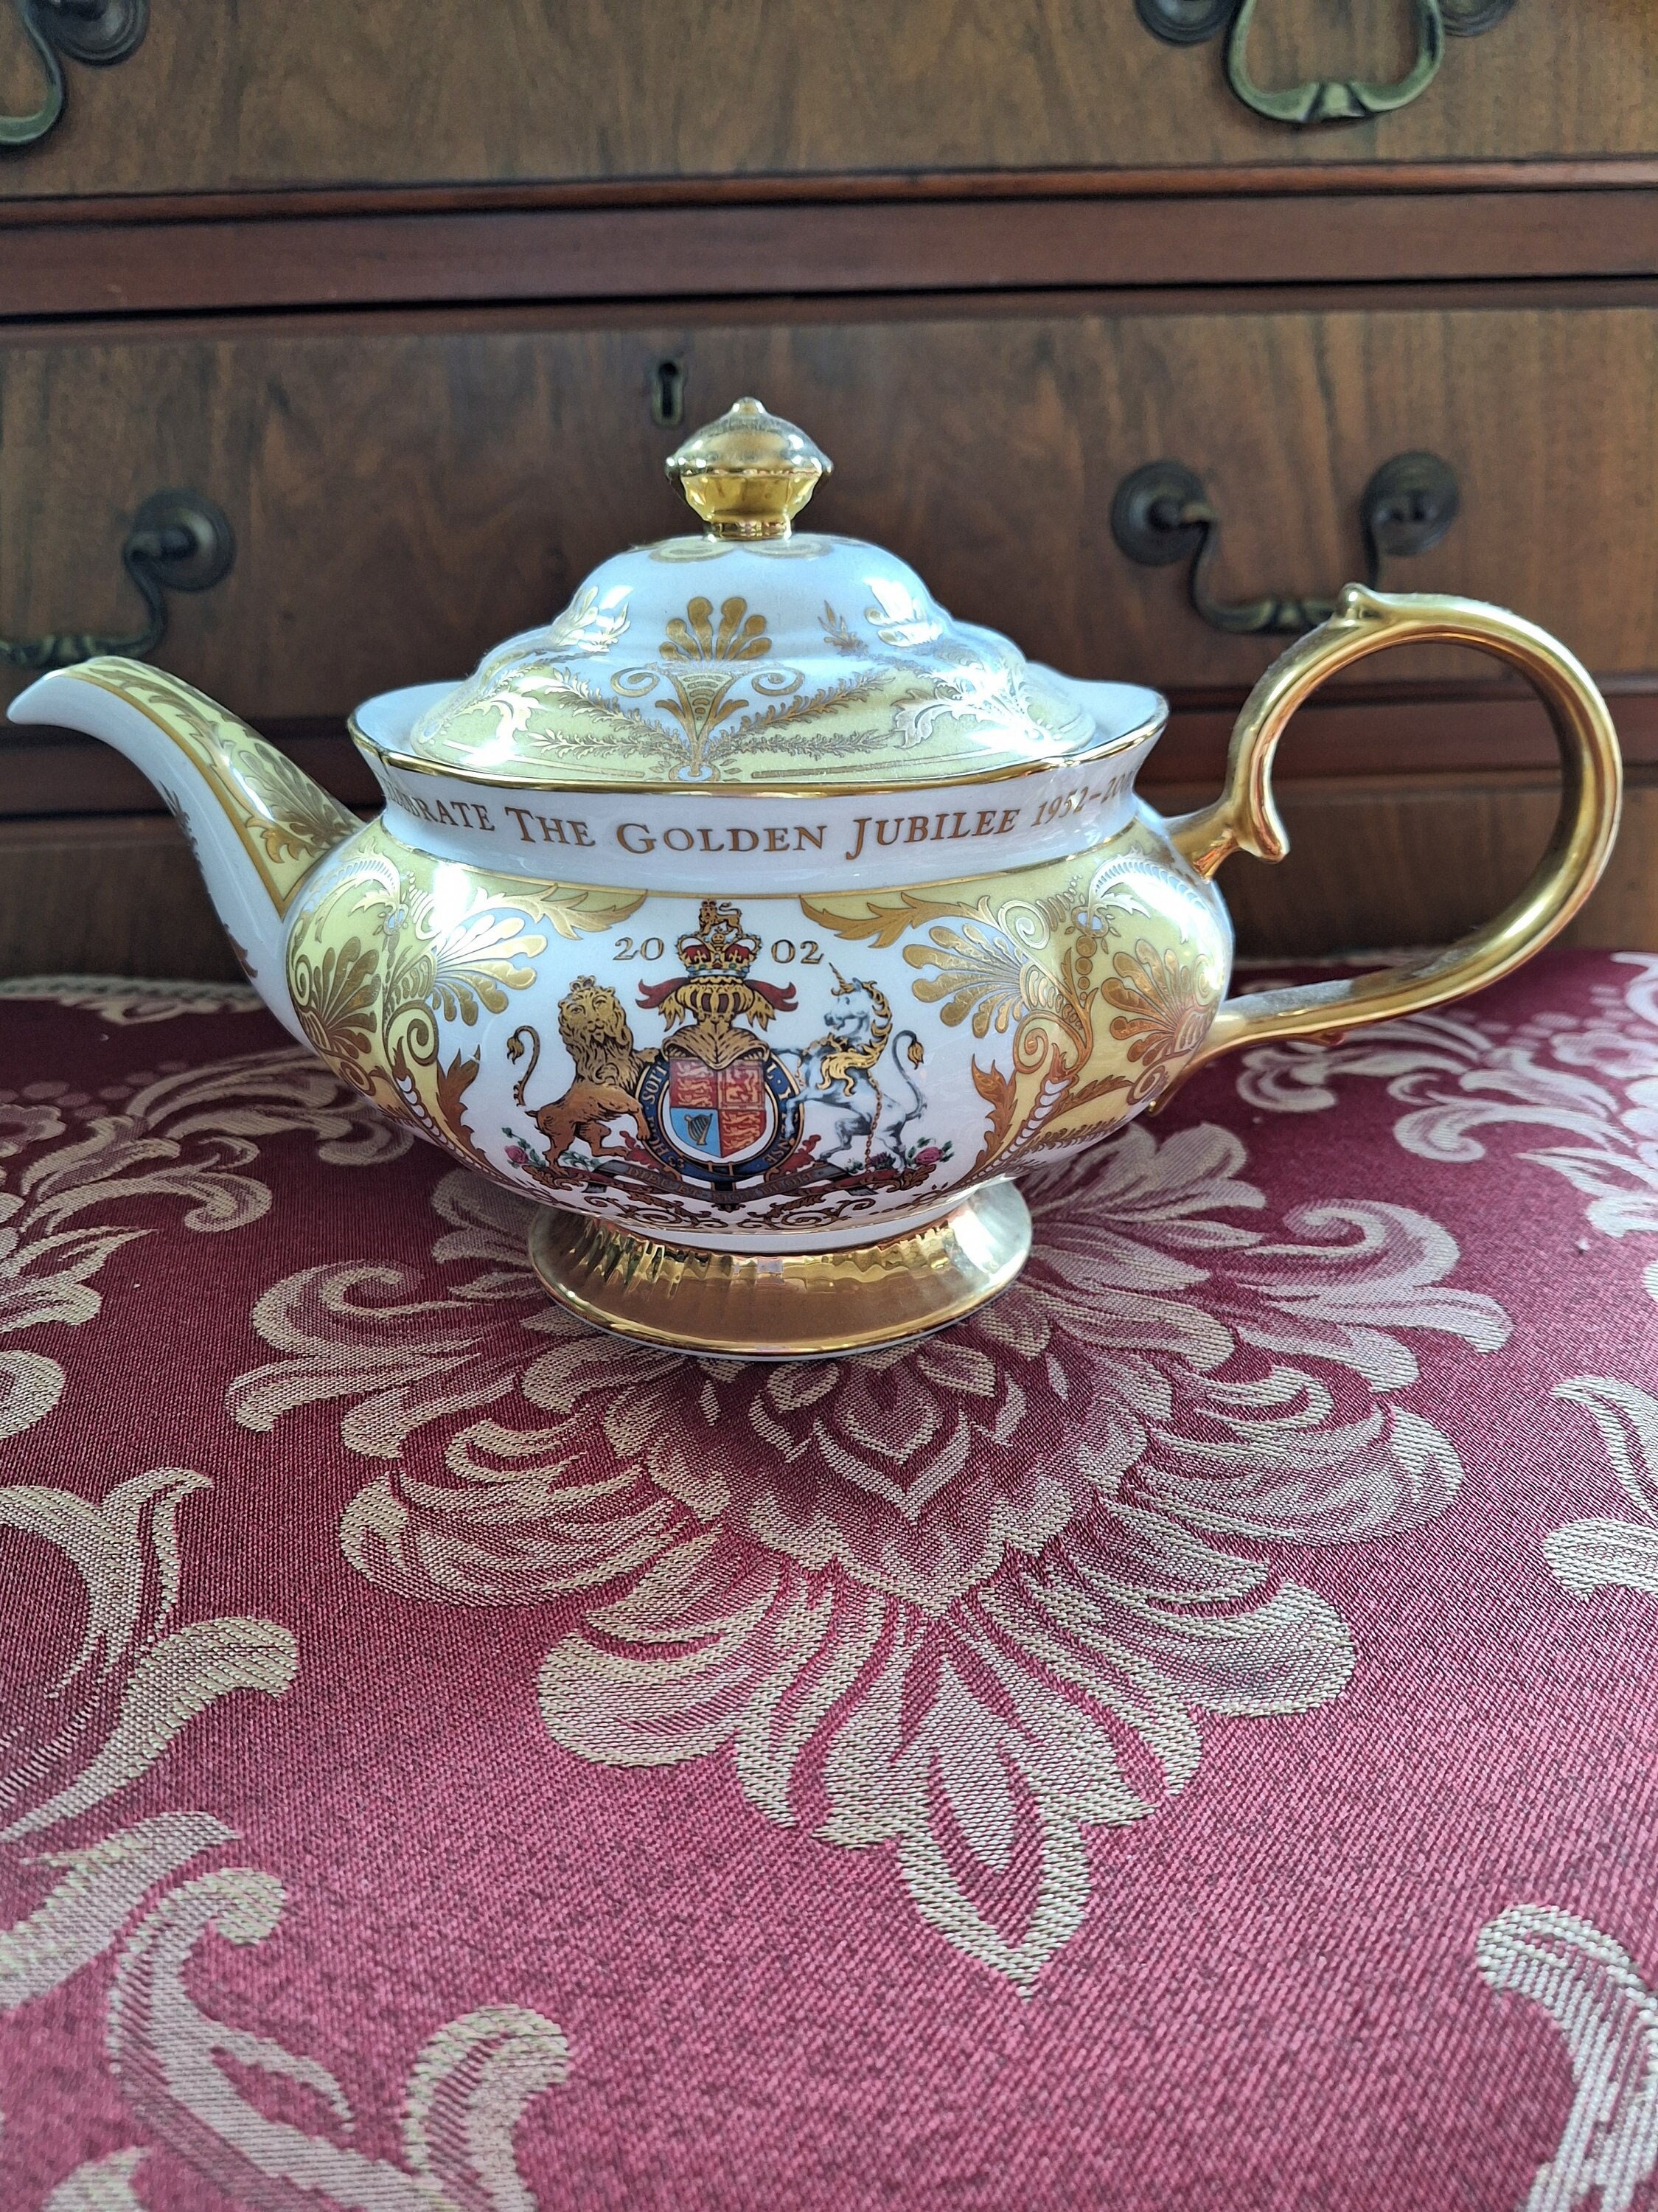 Teabloom - Teabloom's Buckingham Palace Teapot Set is meant to inspire  hosts to hold the type of elegant parties that existed in Buckingham's  history. Guests can watch the flowering tea brew right